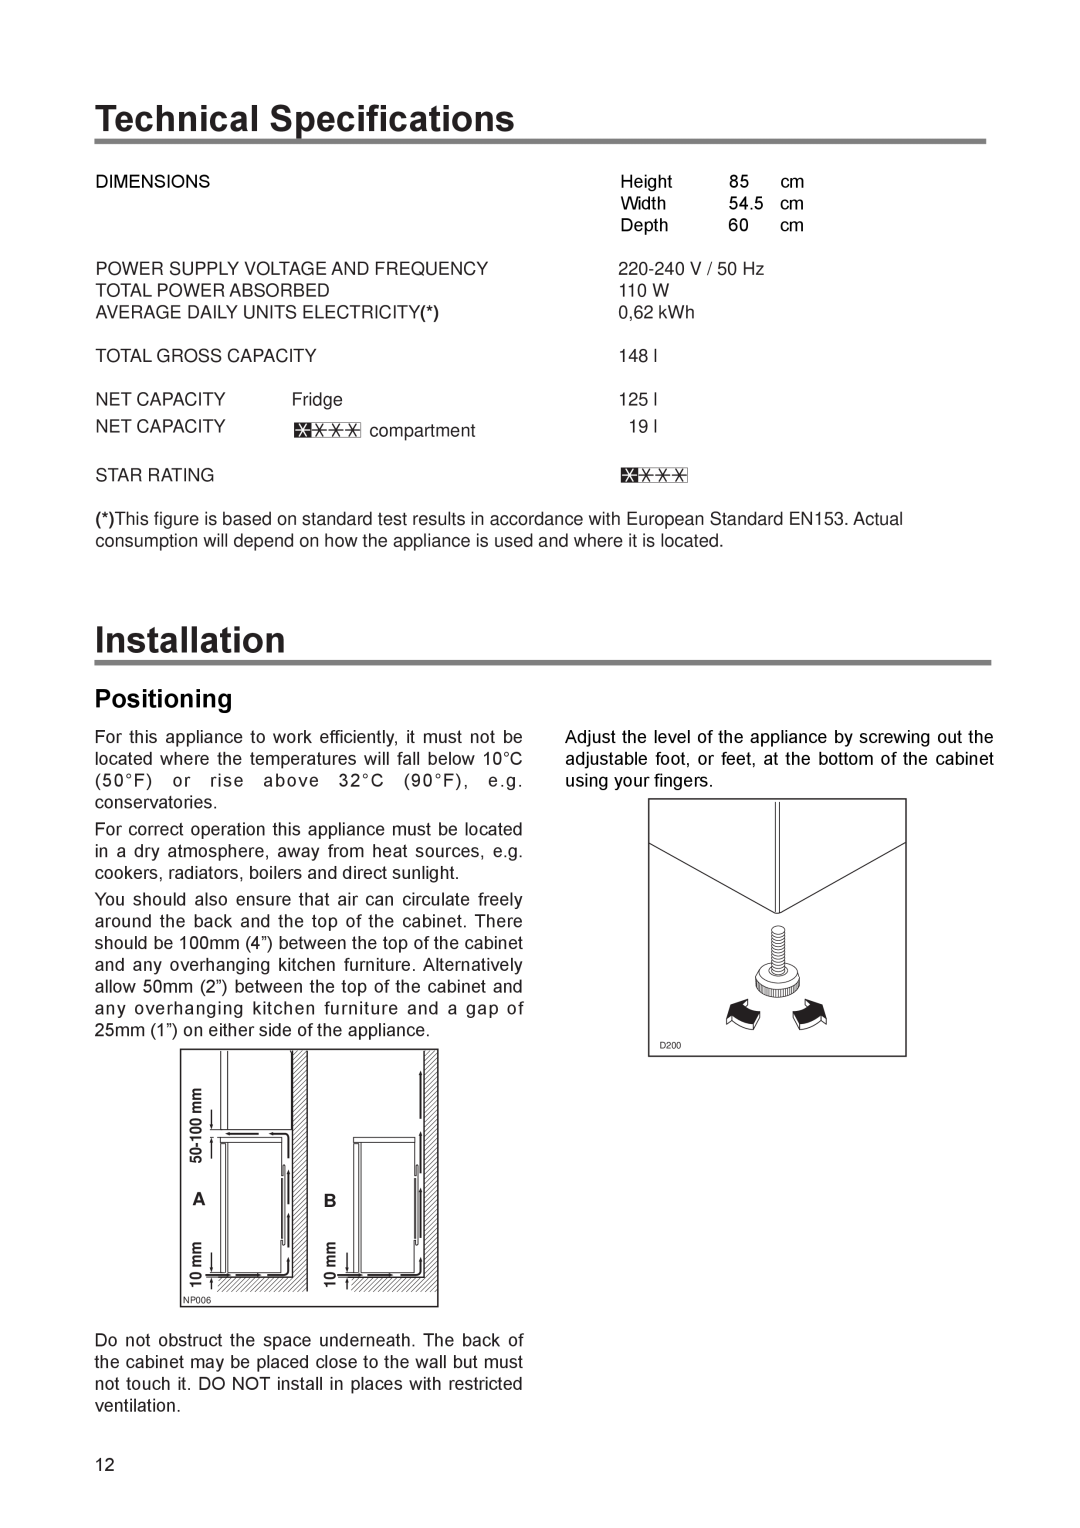 Zanussi ZR 66/4 SI manual Technical Specifications, Installation, Positioning 